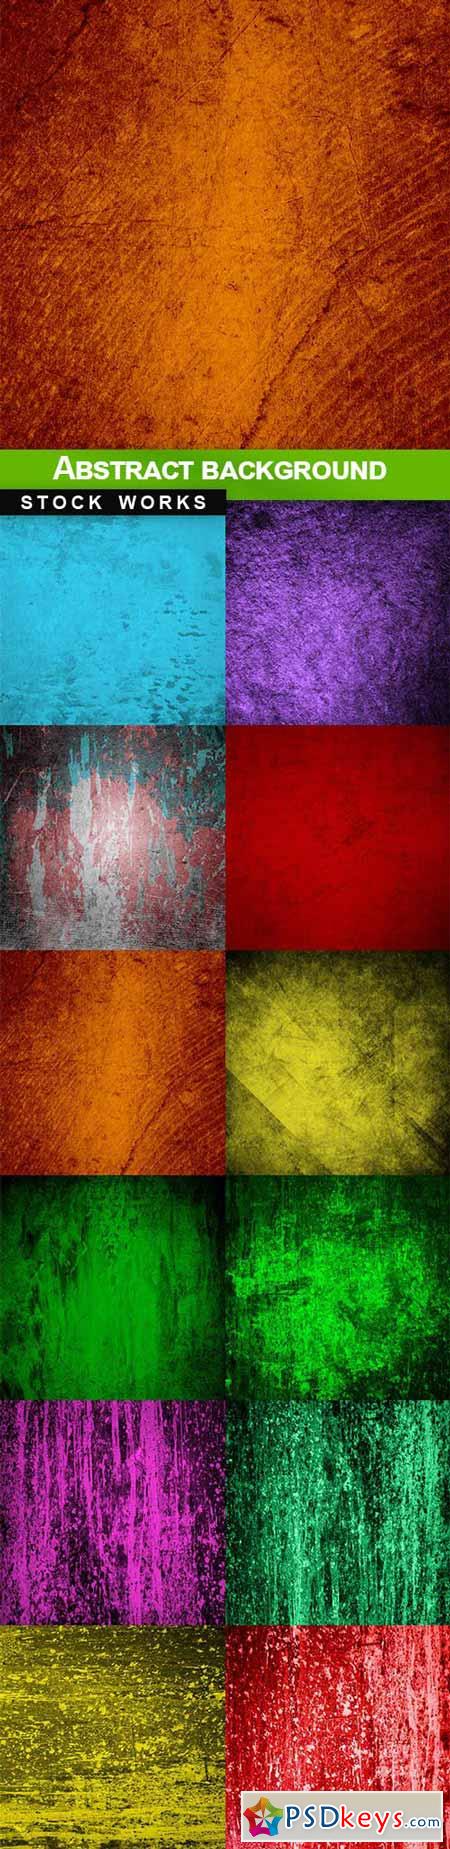 Abstract background - 12 UHQ JPEG